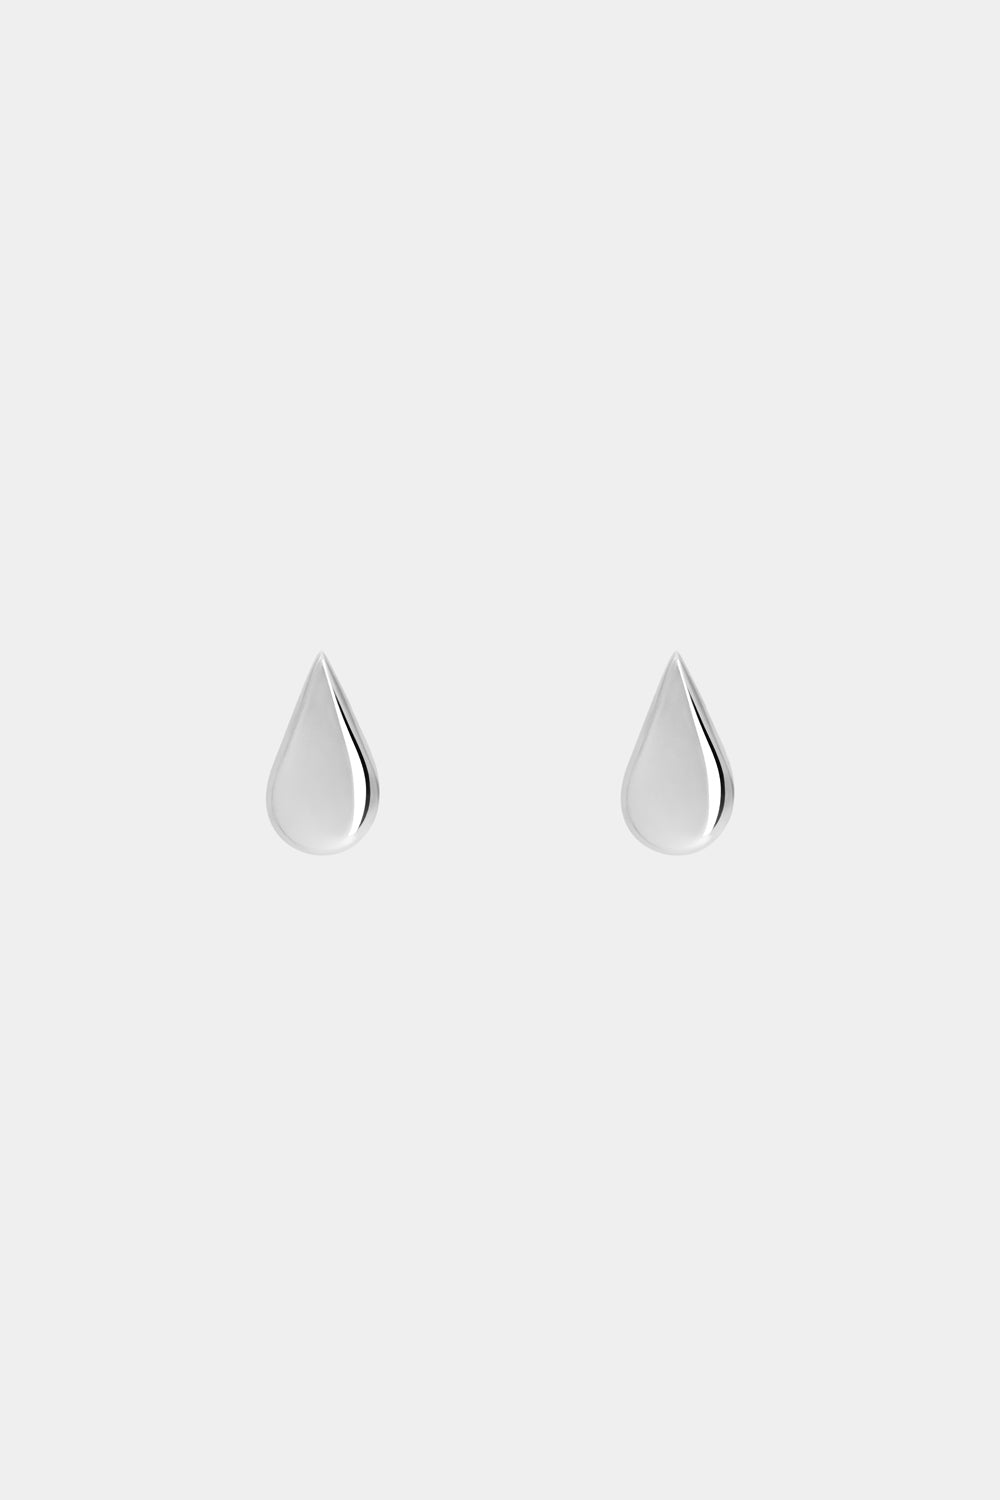 Pear Stud Earrings | Silver or 9K White Gold, More Options Available| Natasha Schweitzer